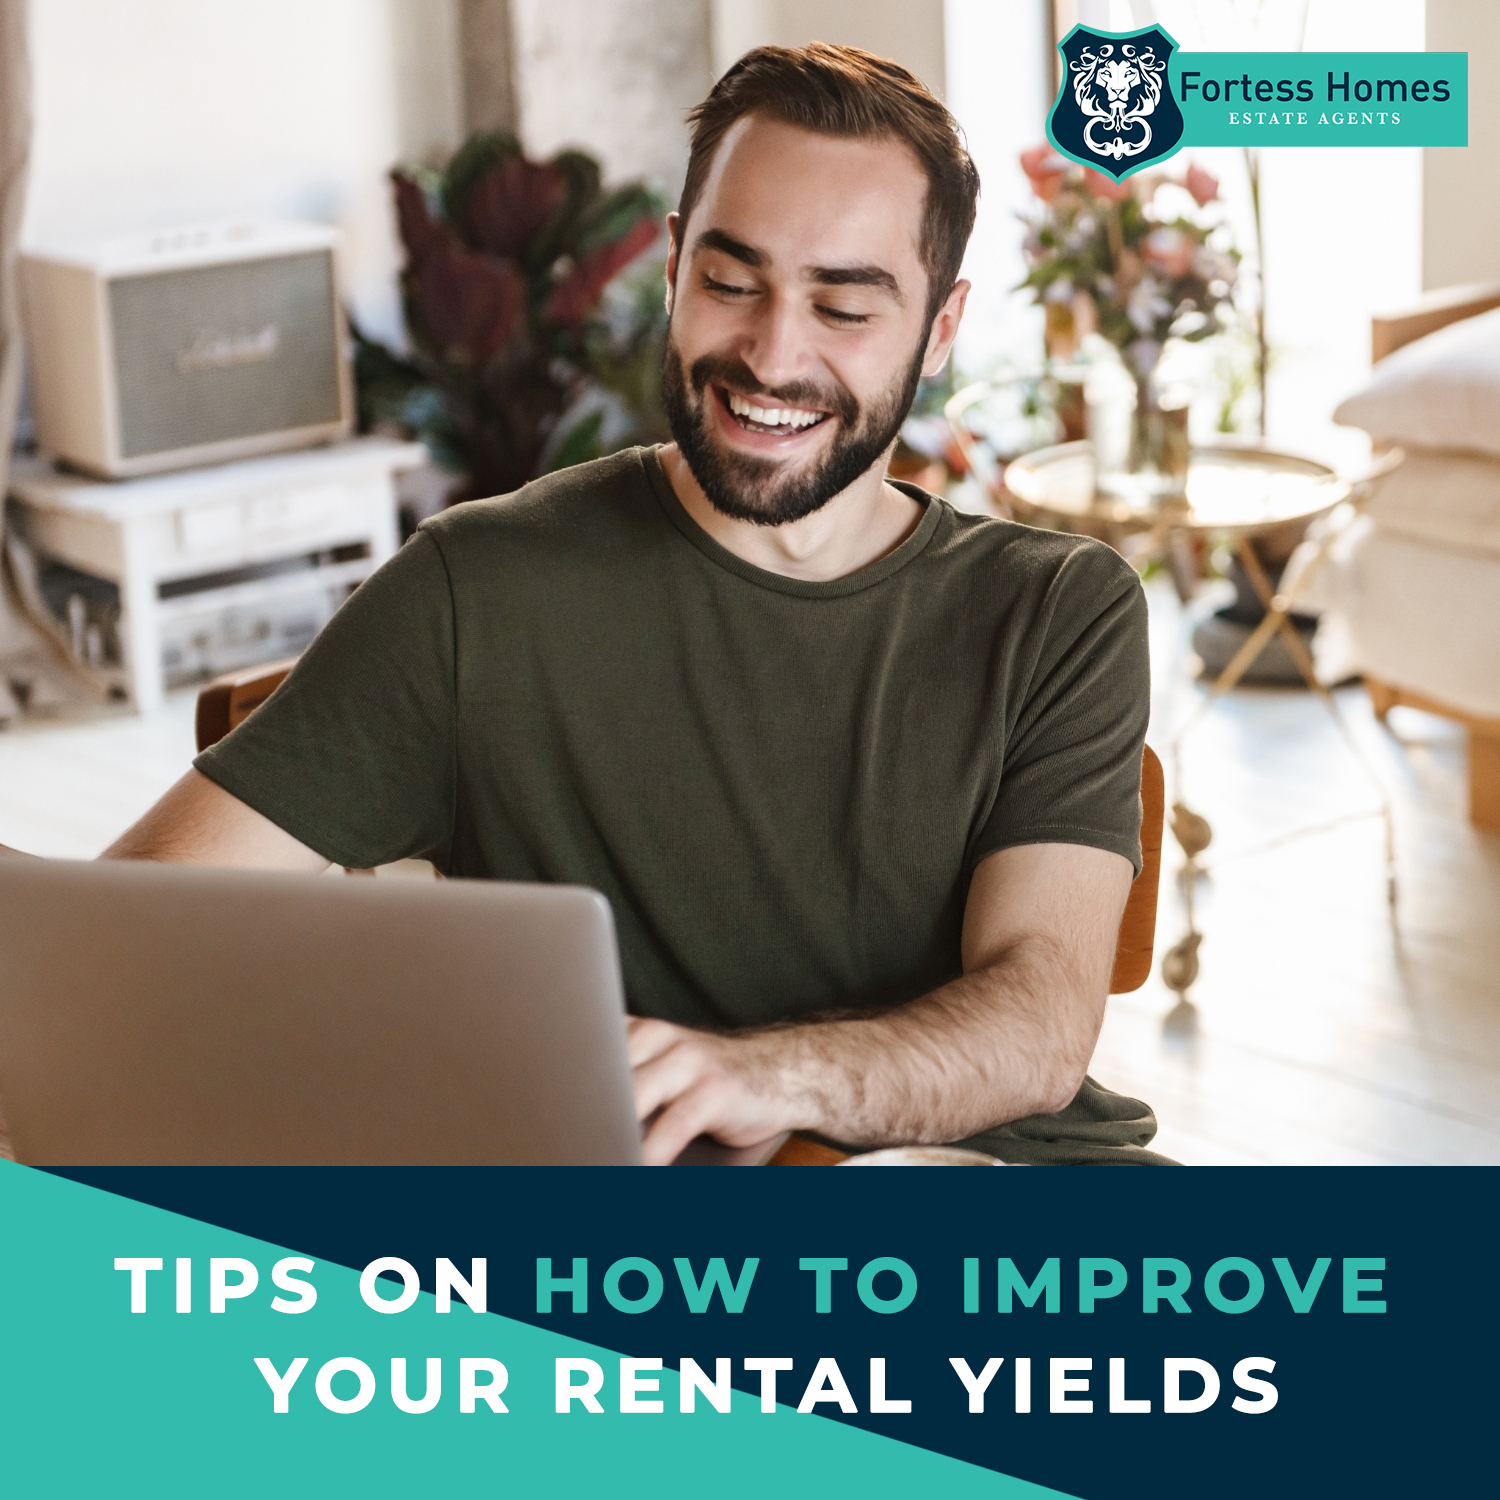 Tips on how to improve your rental yields